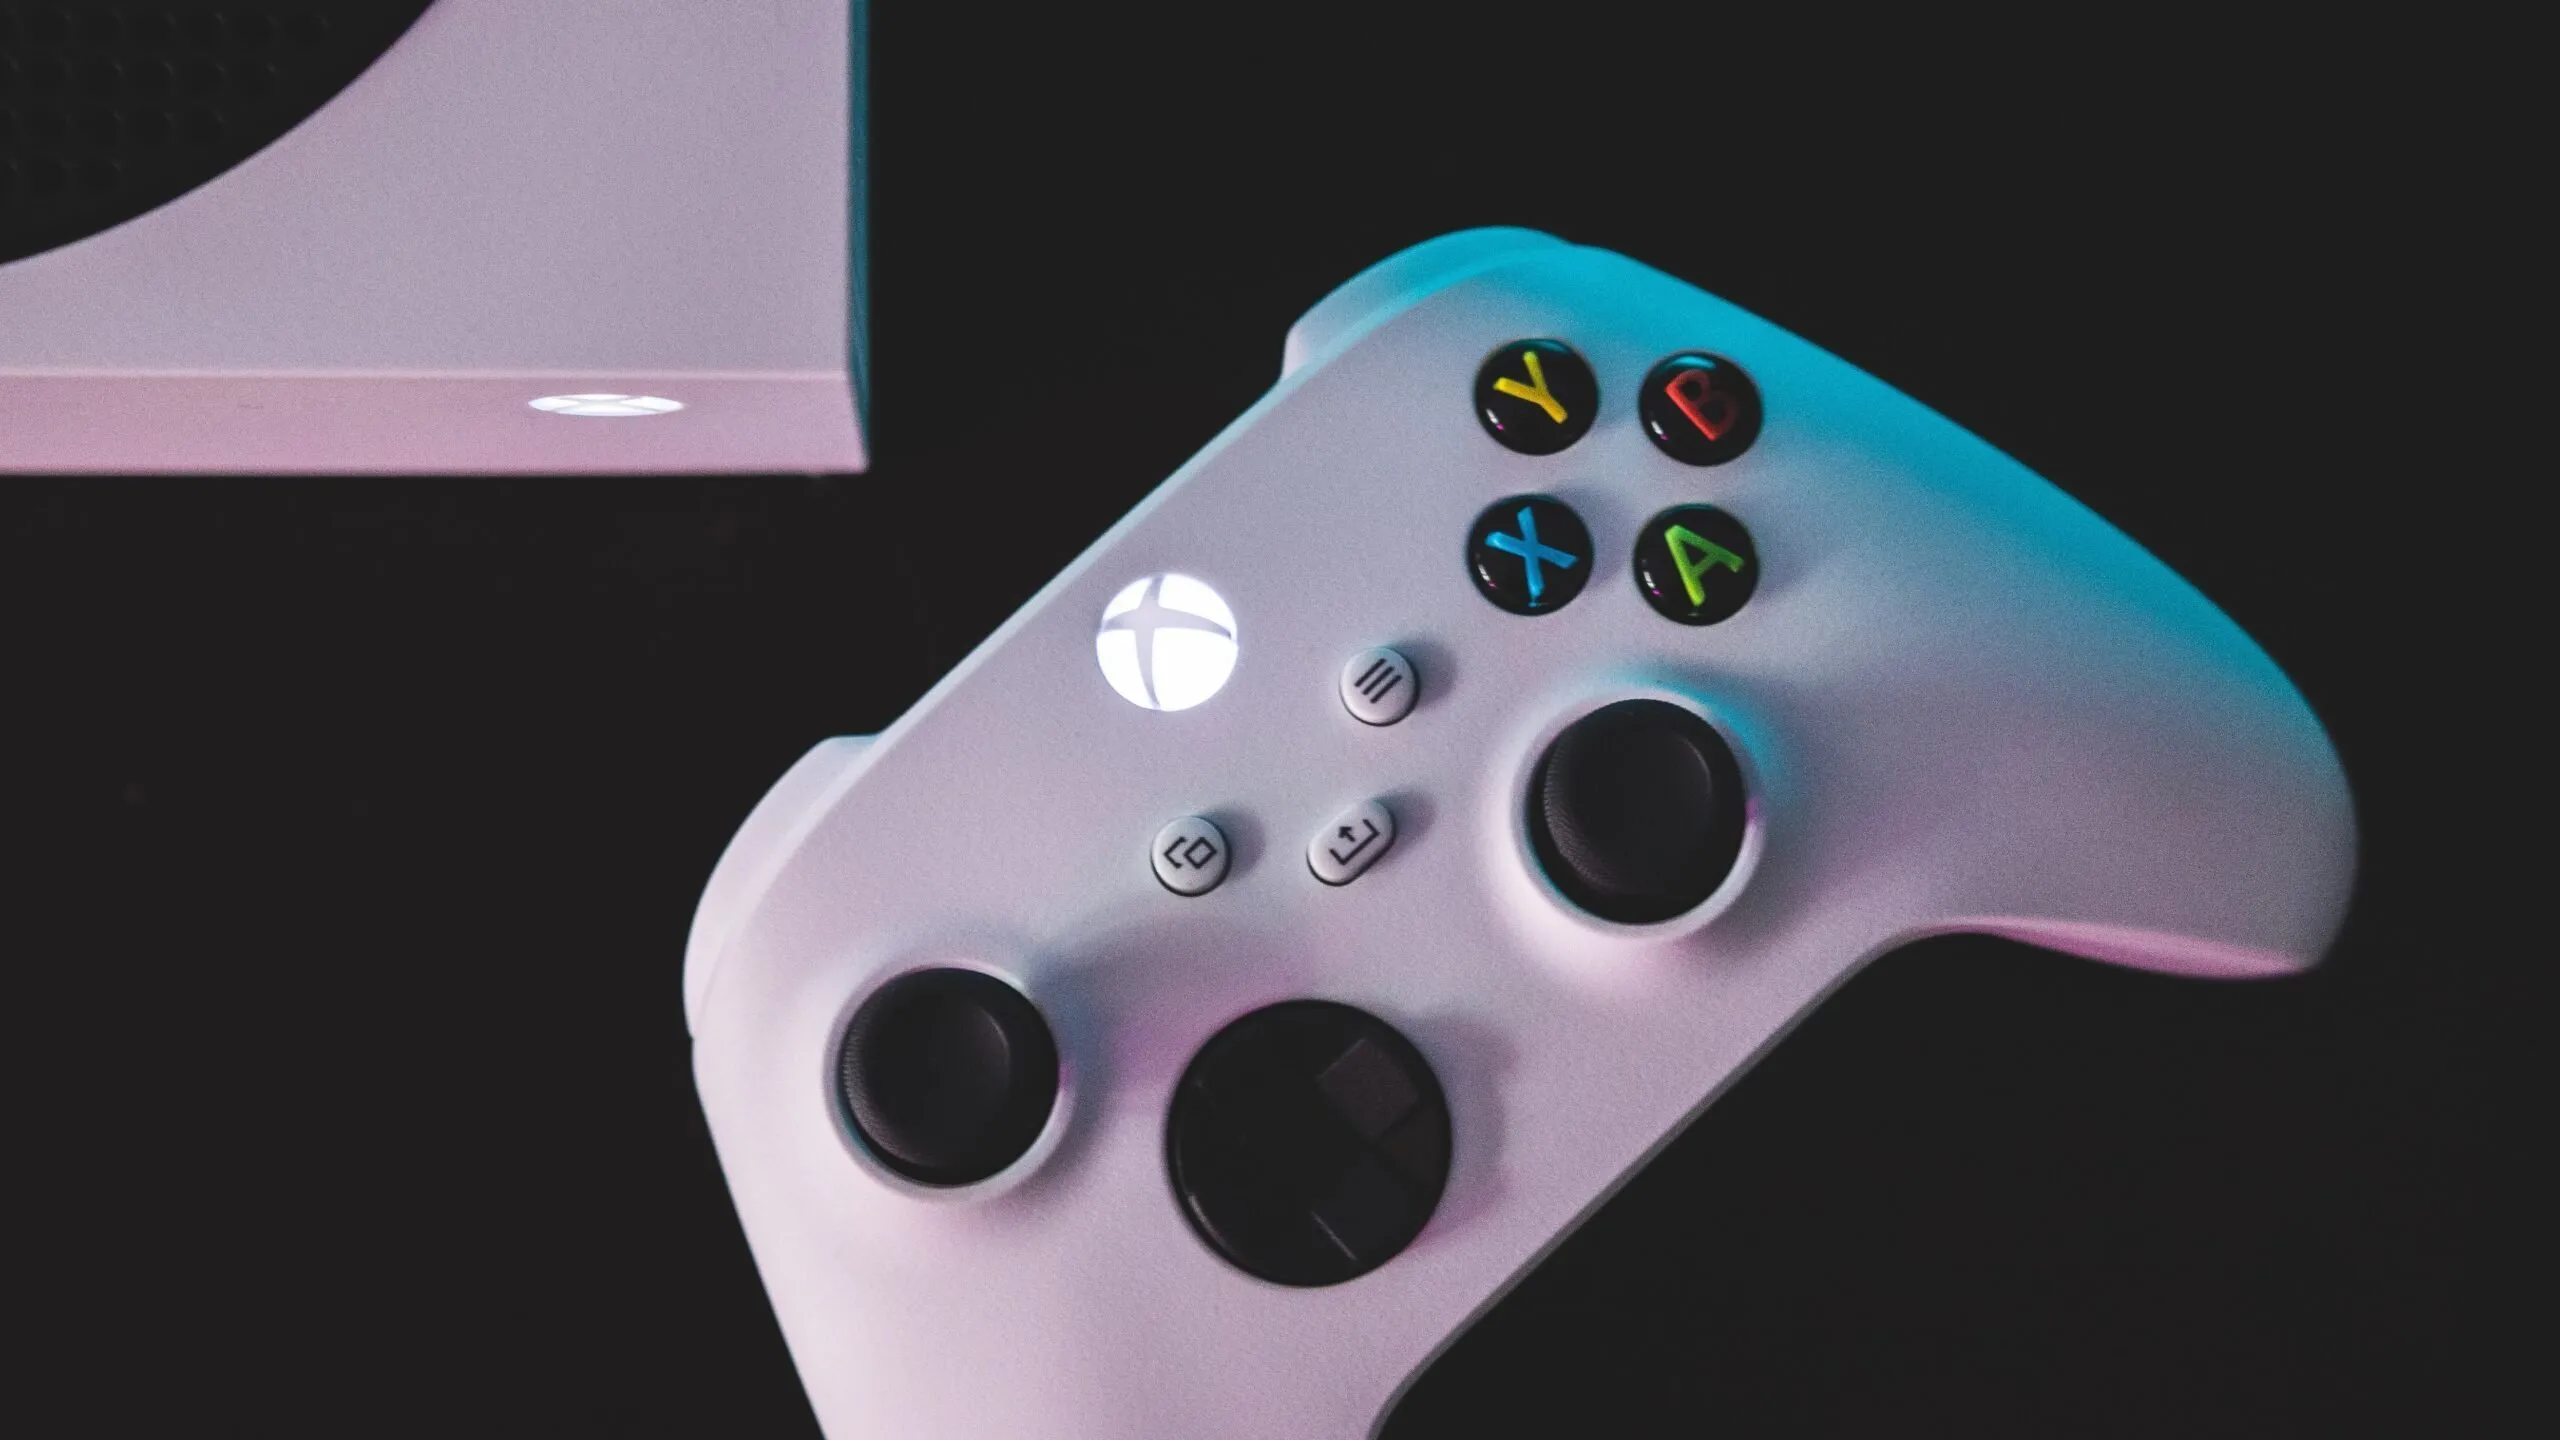 The Xbox Series S with controller. Image: Kamil S. on Unsplash.